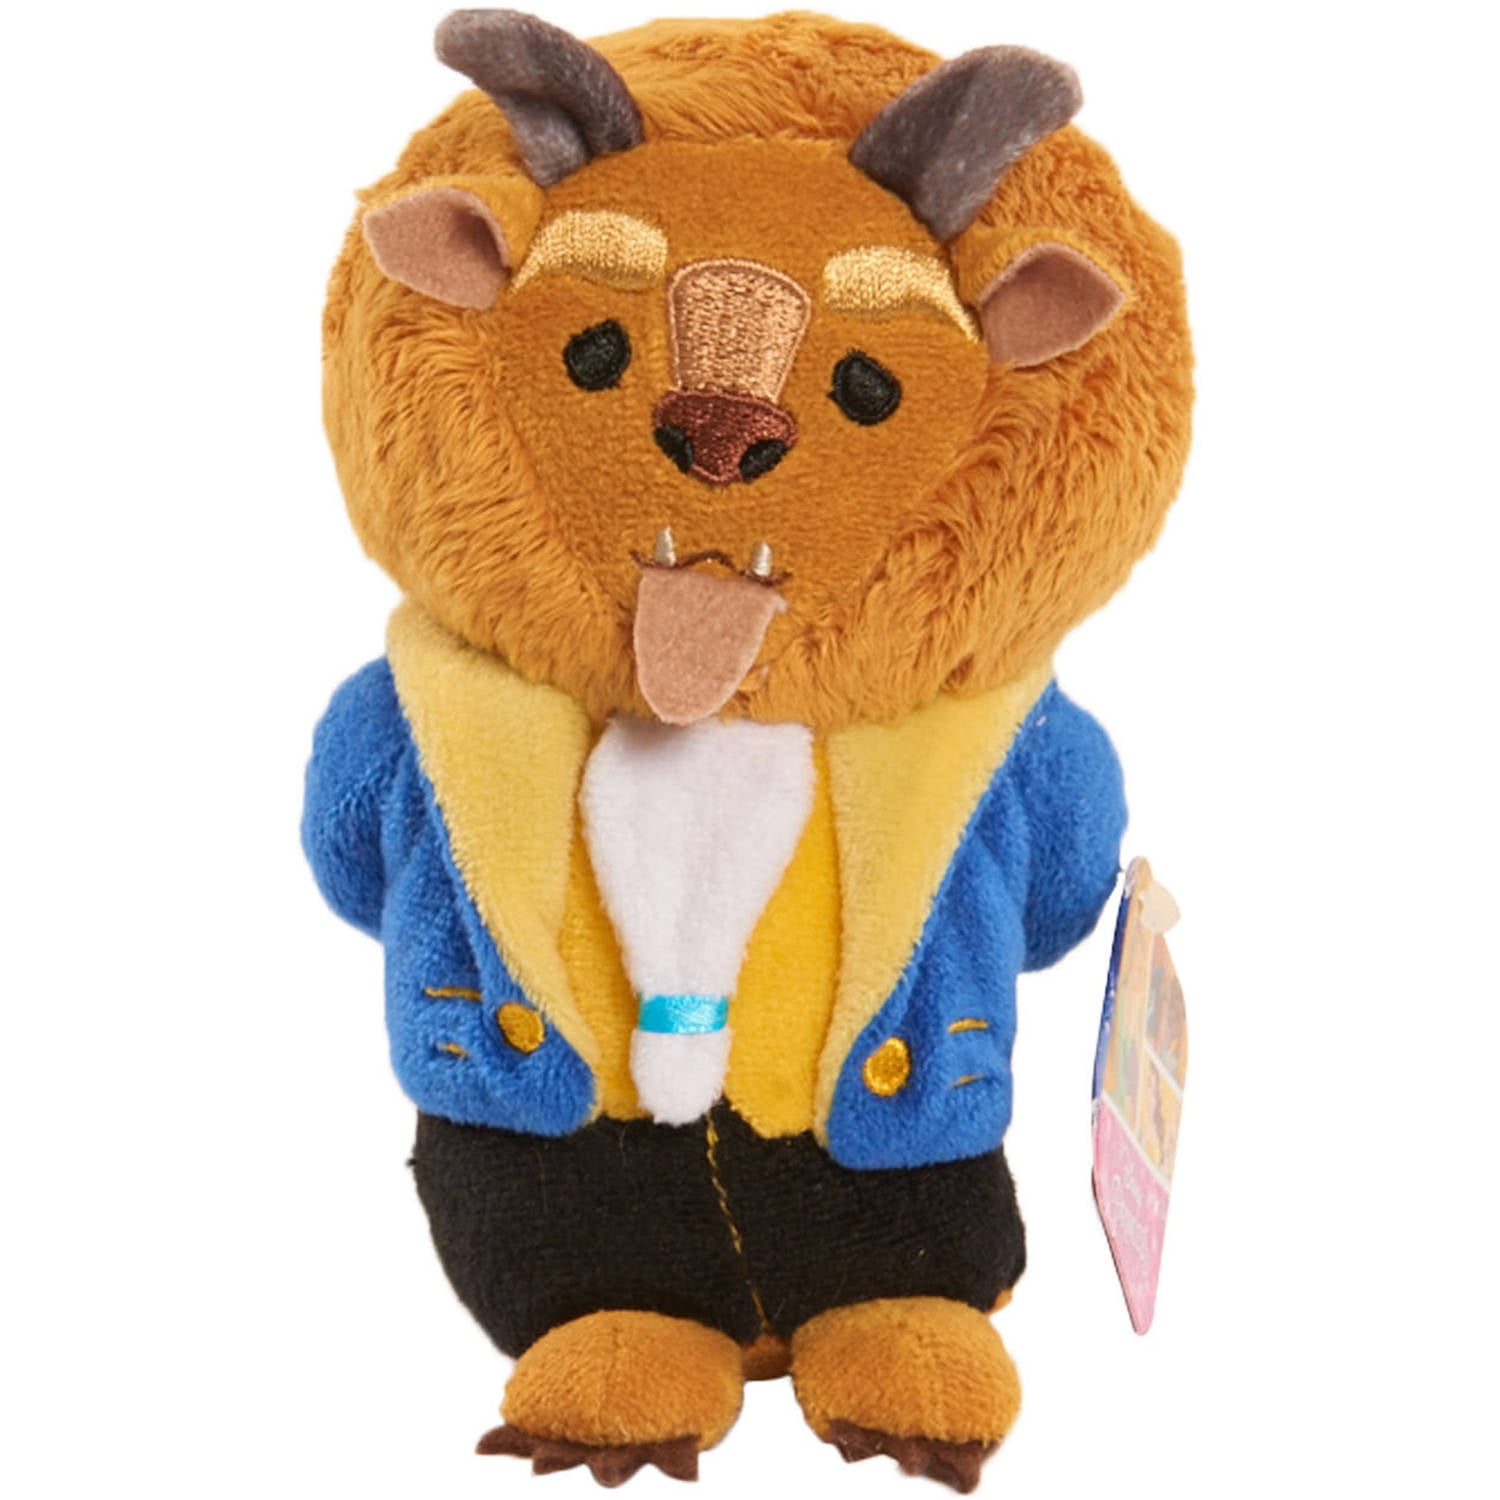 beauty and the beast plush toy